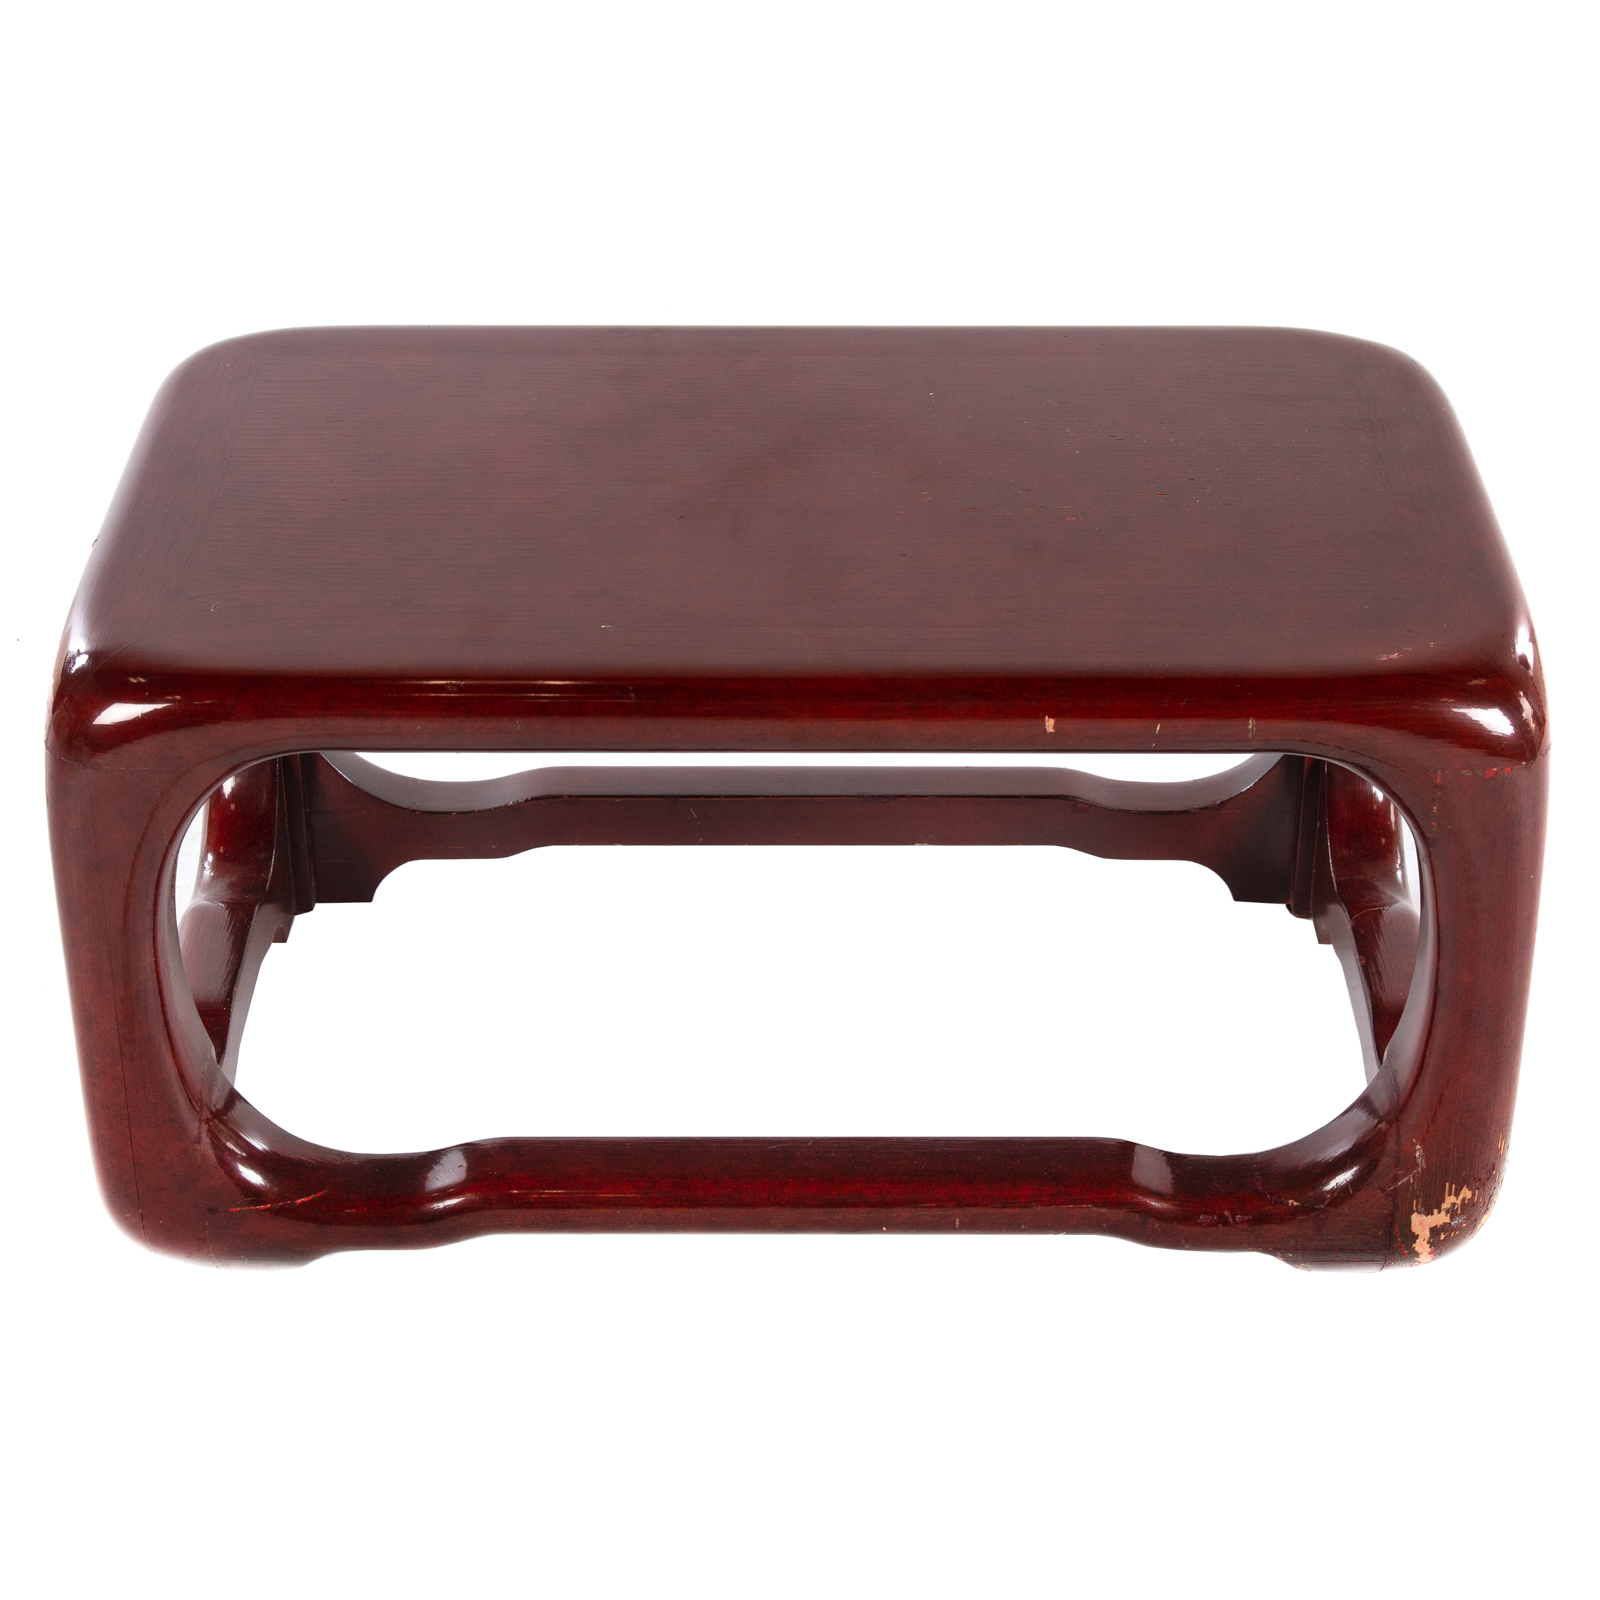 RED LACQUER MODERNIST SIDE TABLE